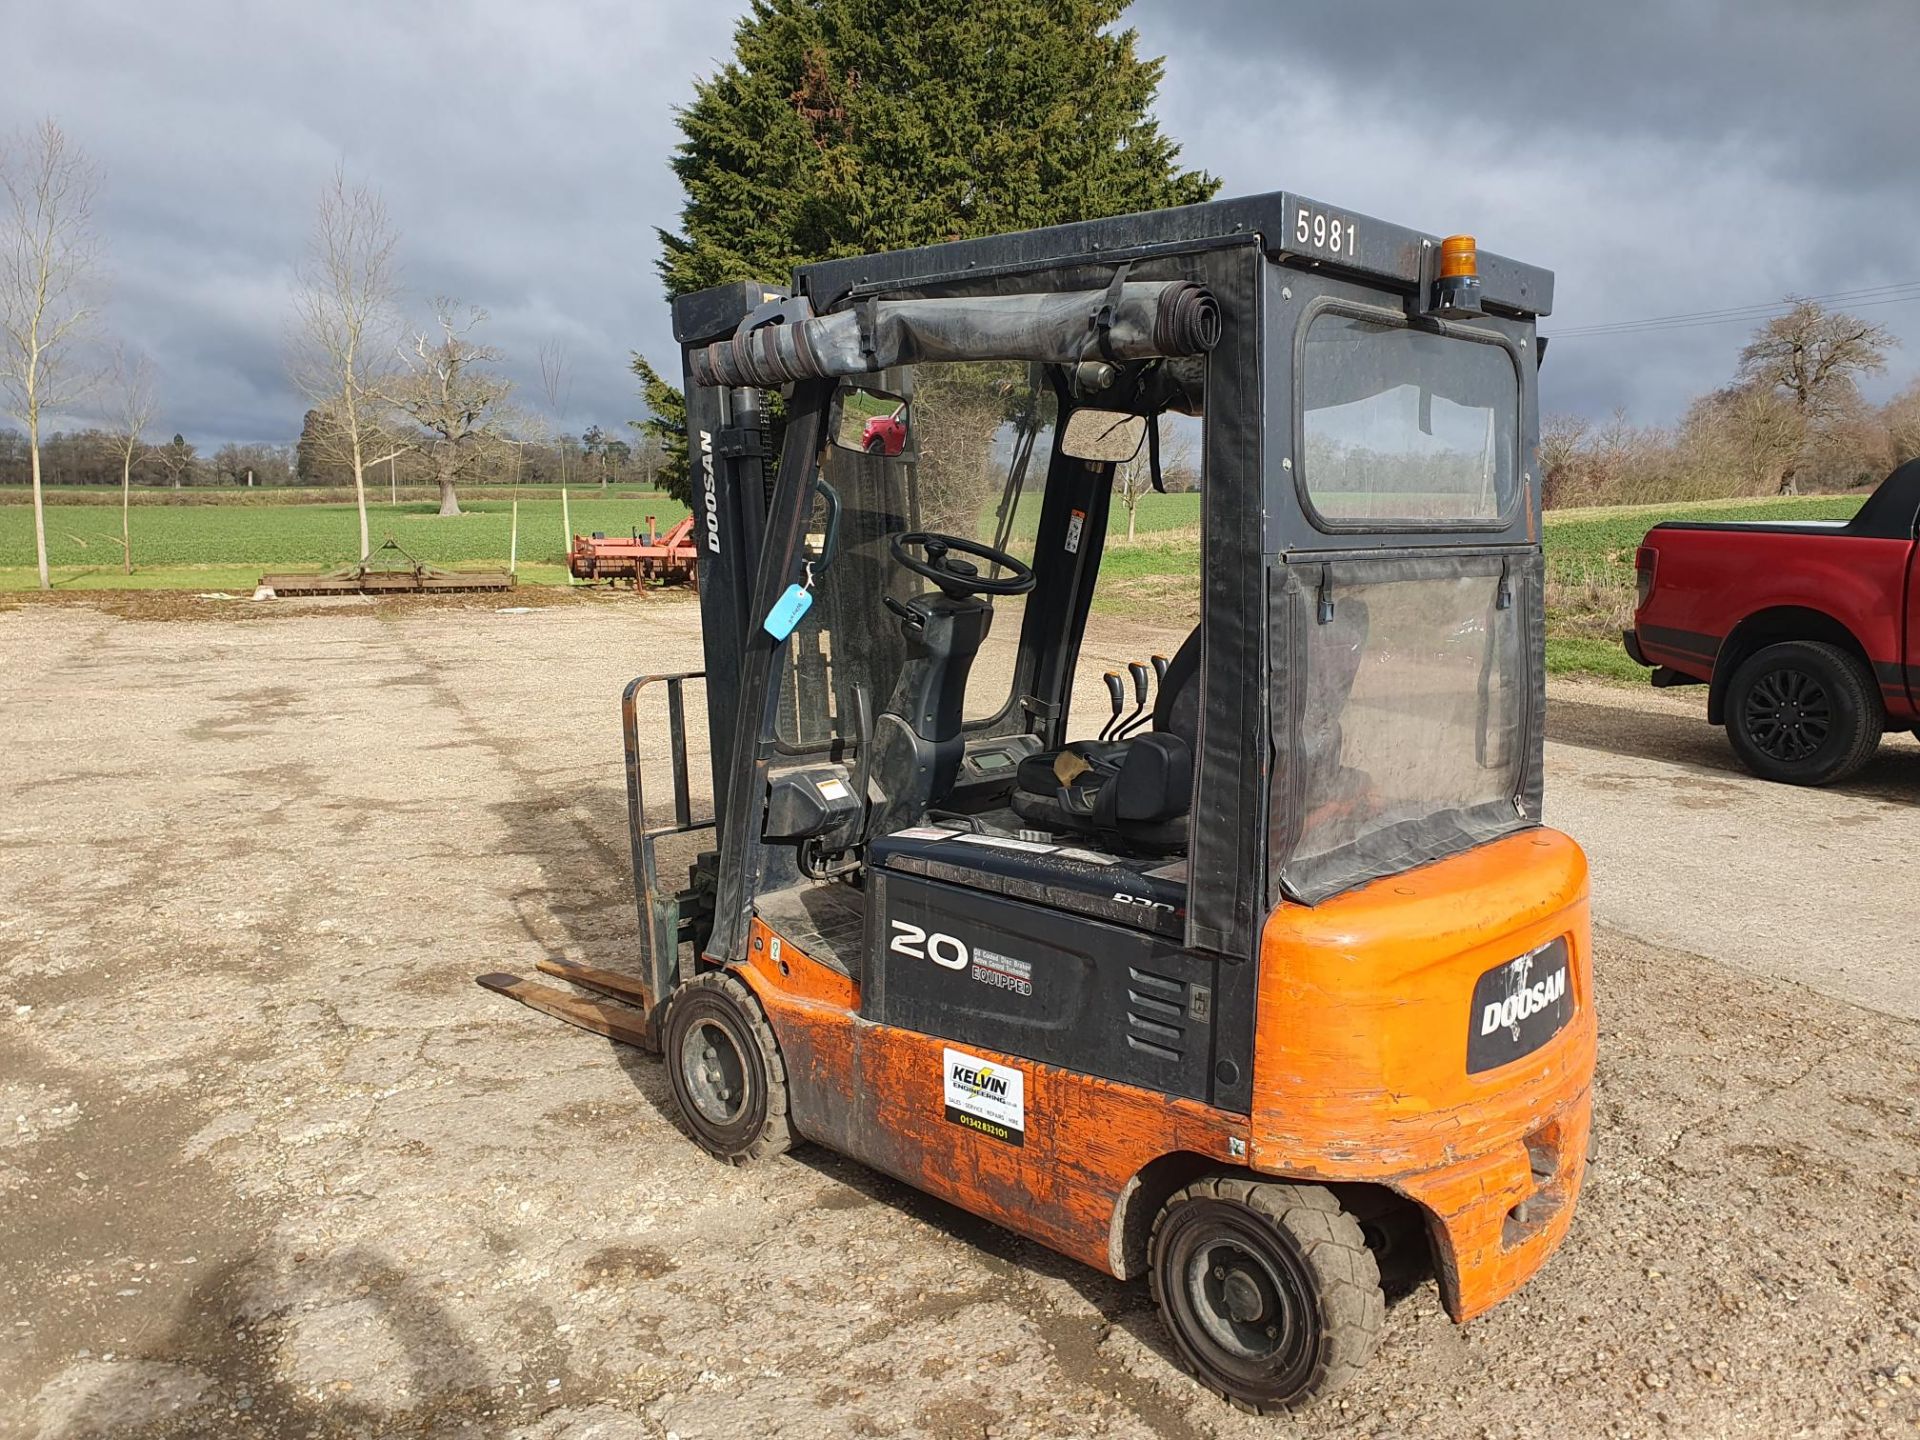 DAEWOO/DOOSAN ELECTRIC 2 TON FORKLIFT WITH FULL CAB - Image 2 of 8